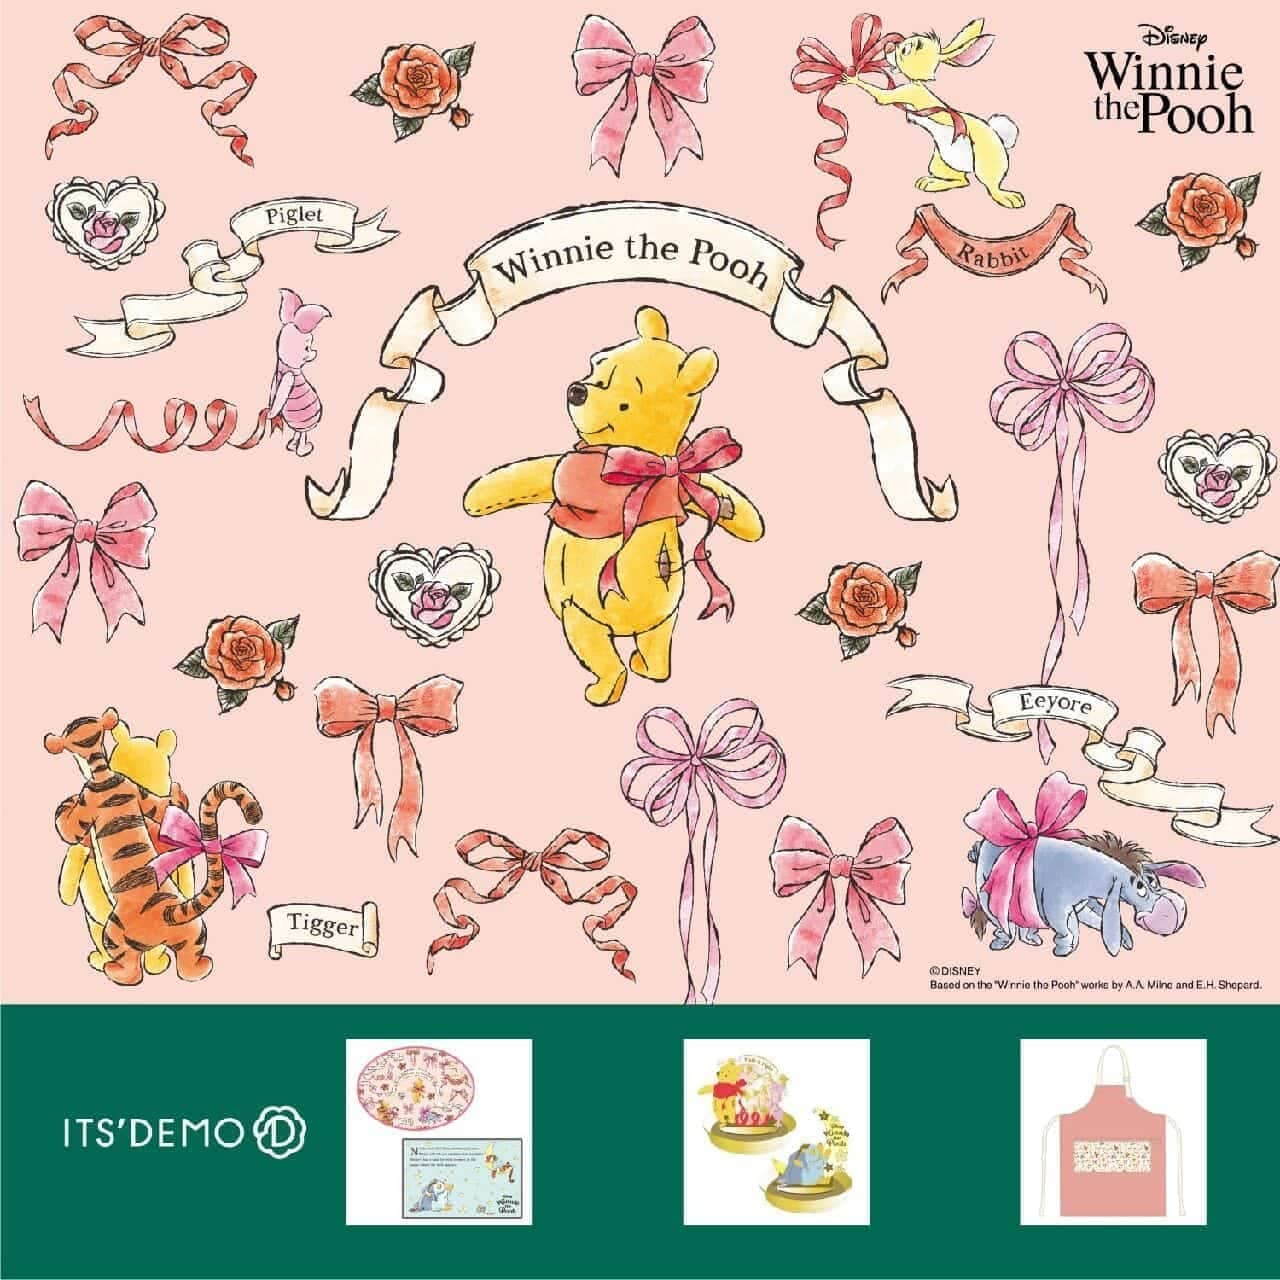 ITS’DEMO “Winnie the Pooh” design product